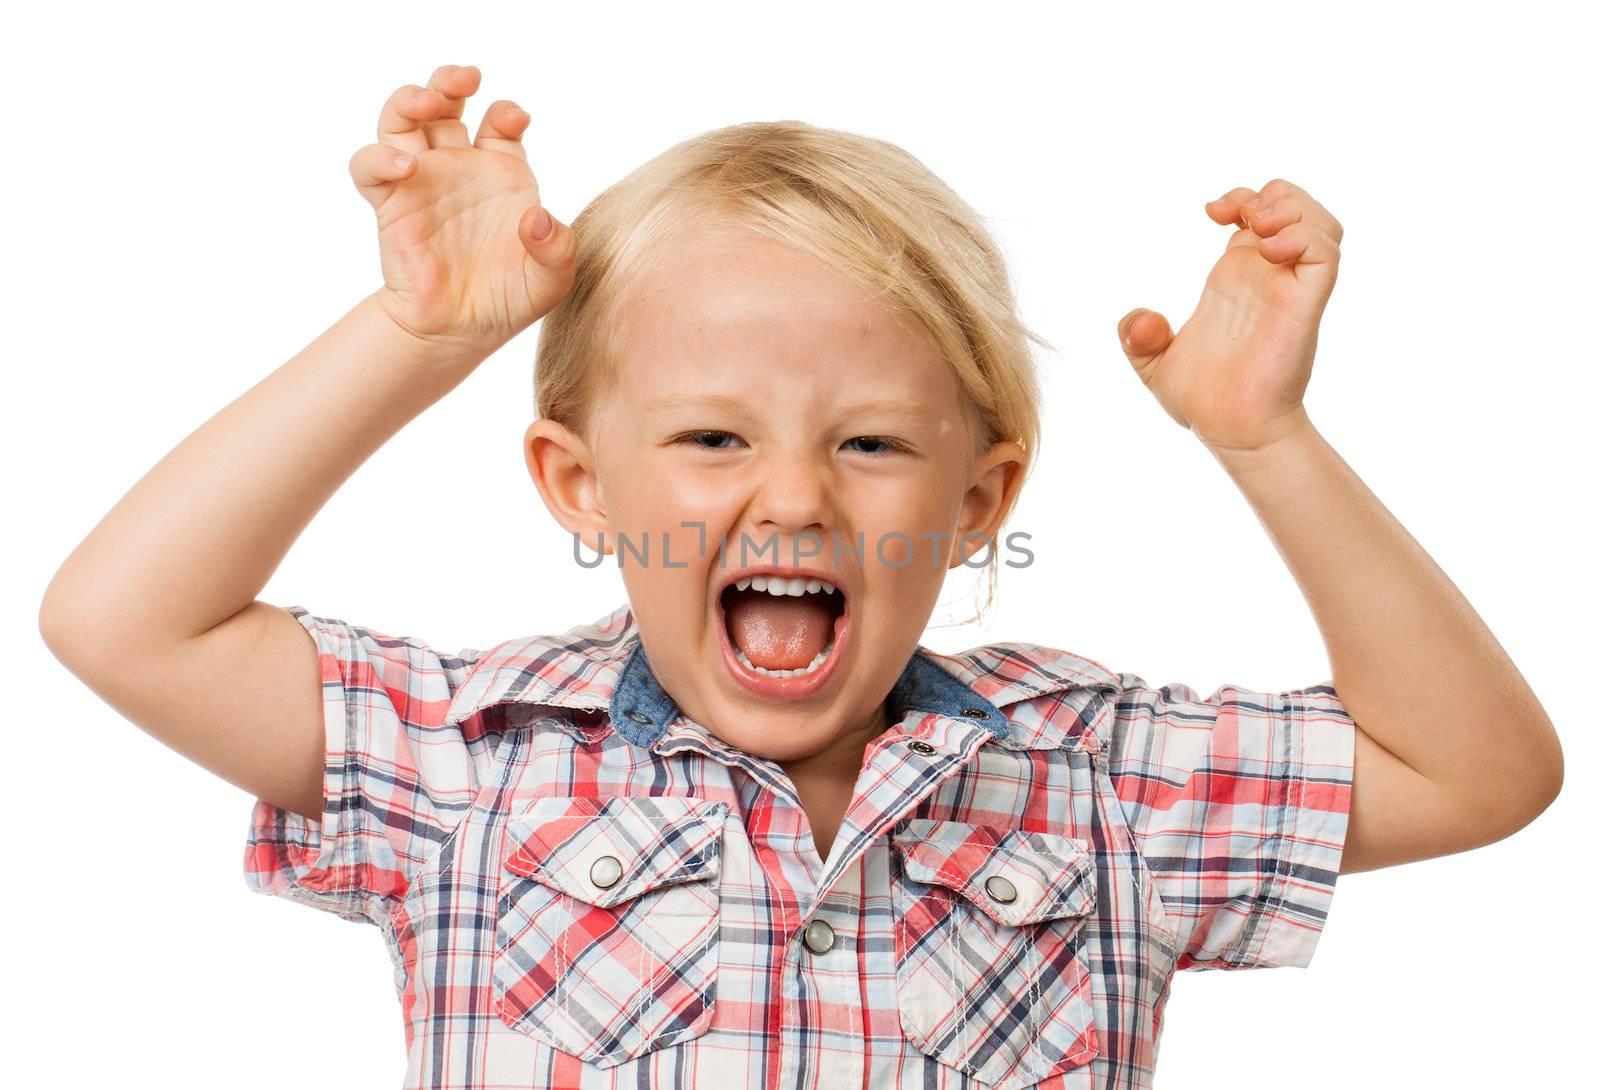 A angry hyperactive young boy screaming. Isolated on white.